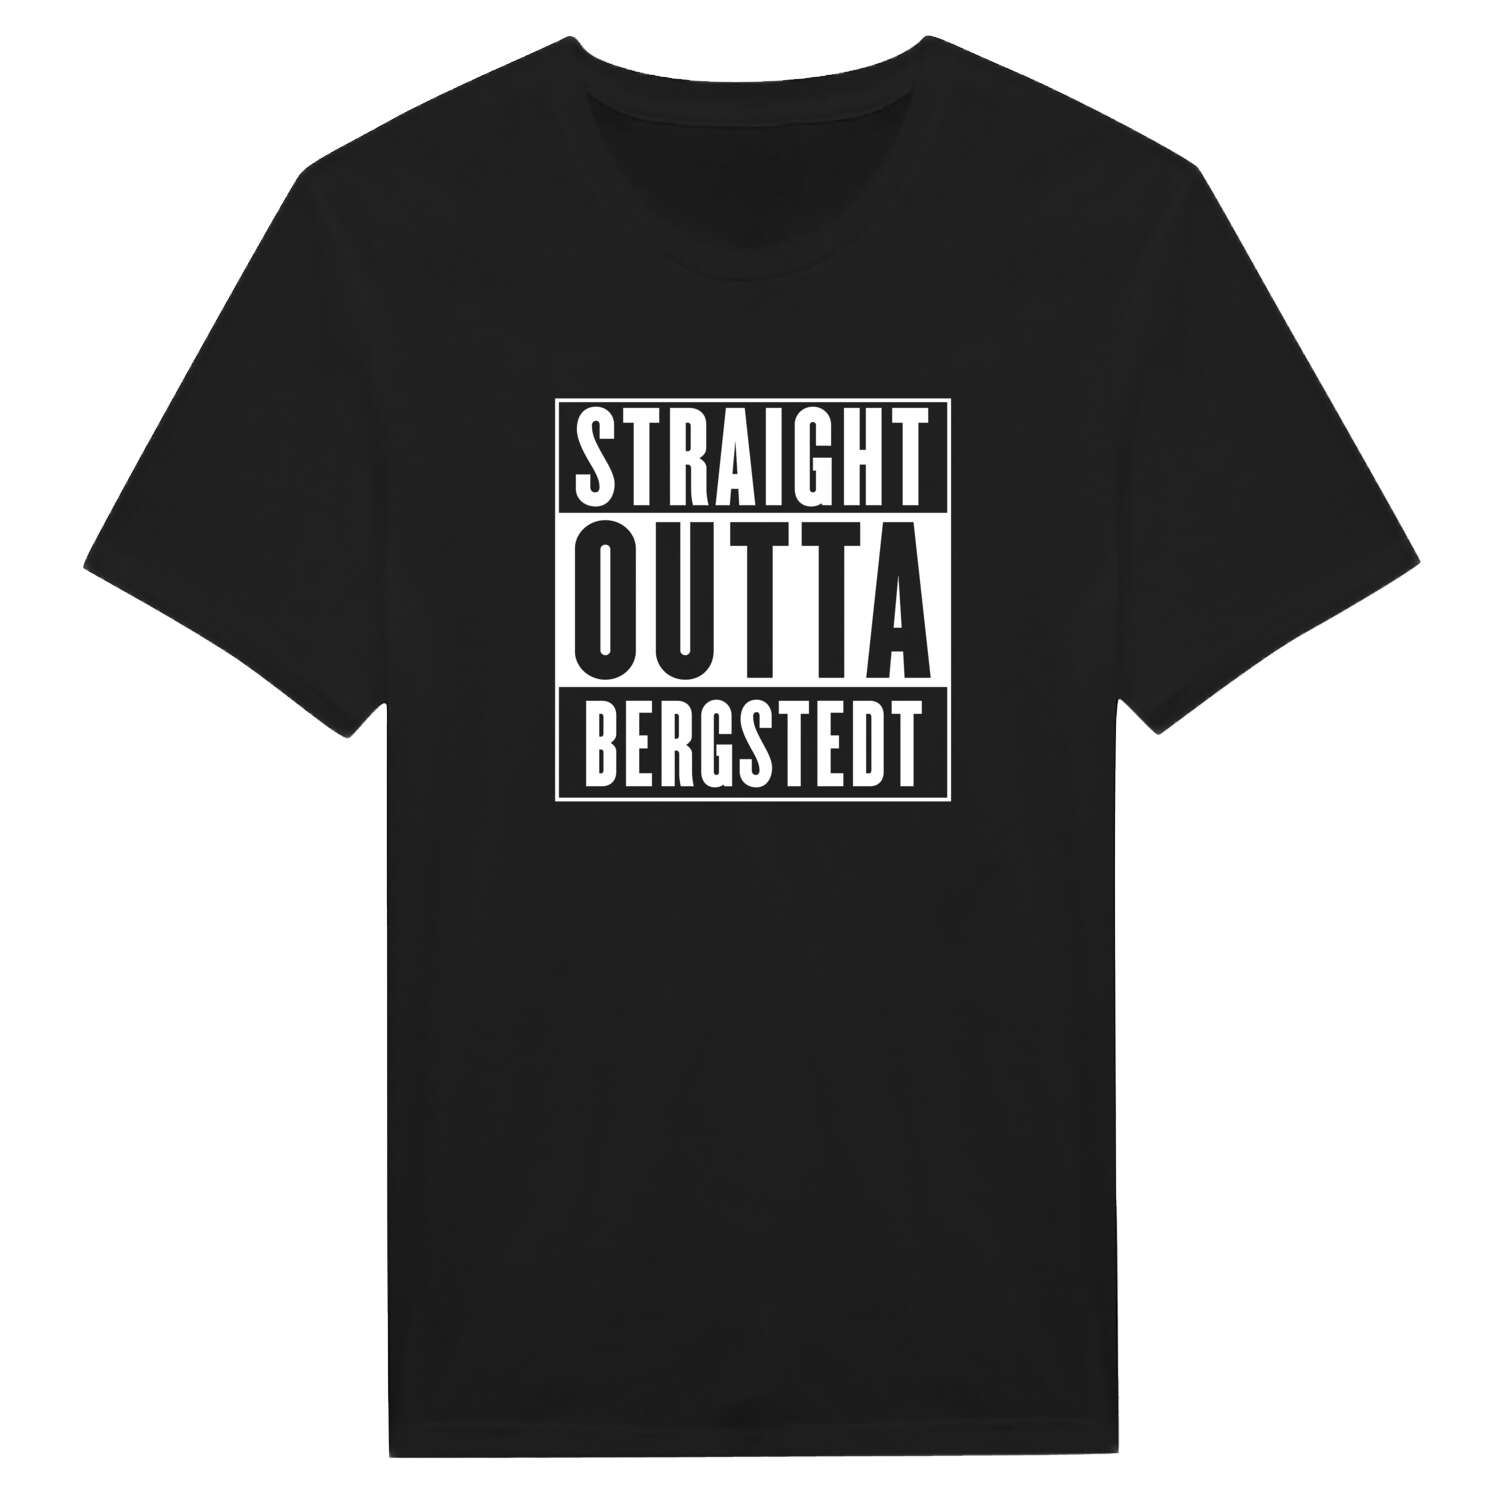 Bergstedt T-Shirt »Straight Outta«